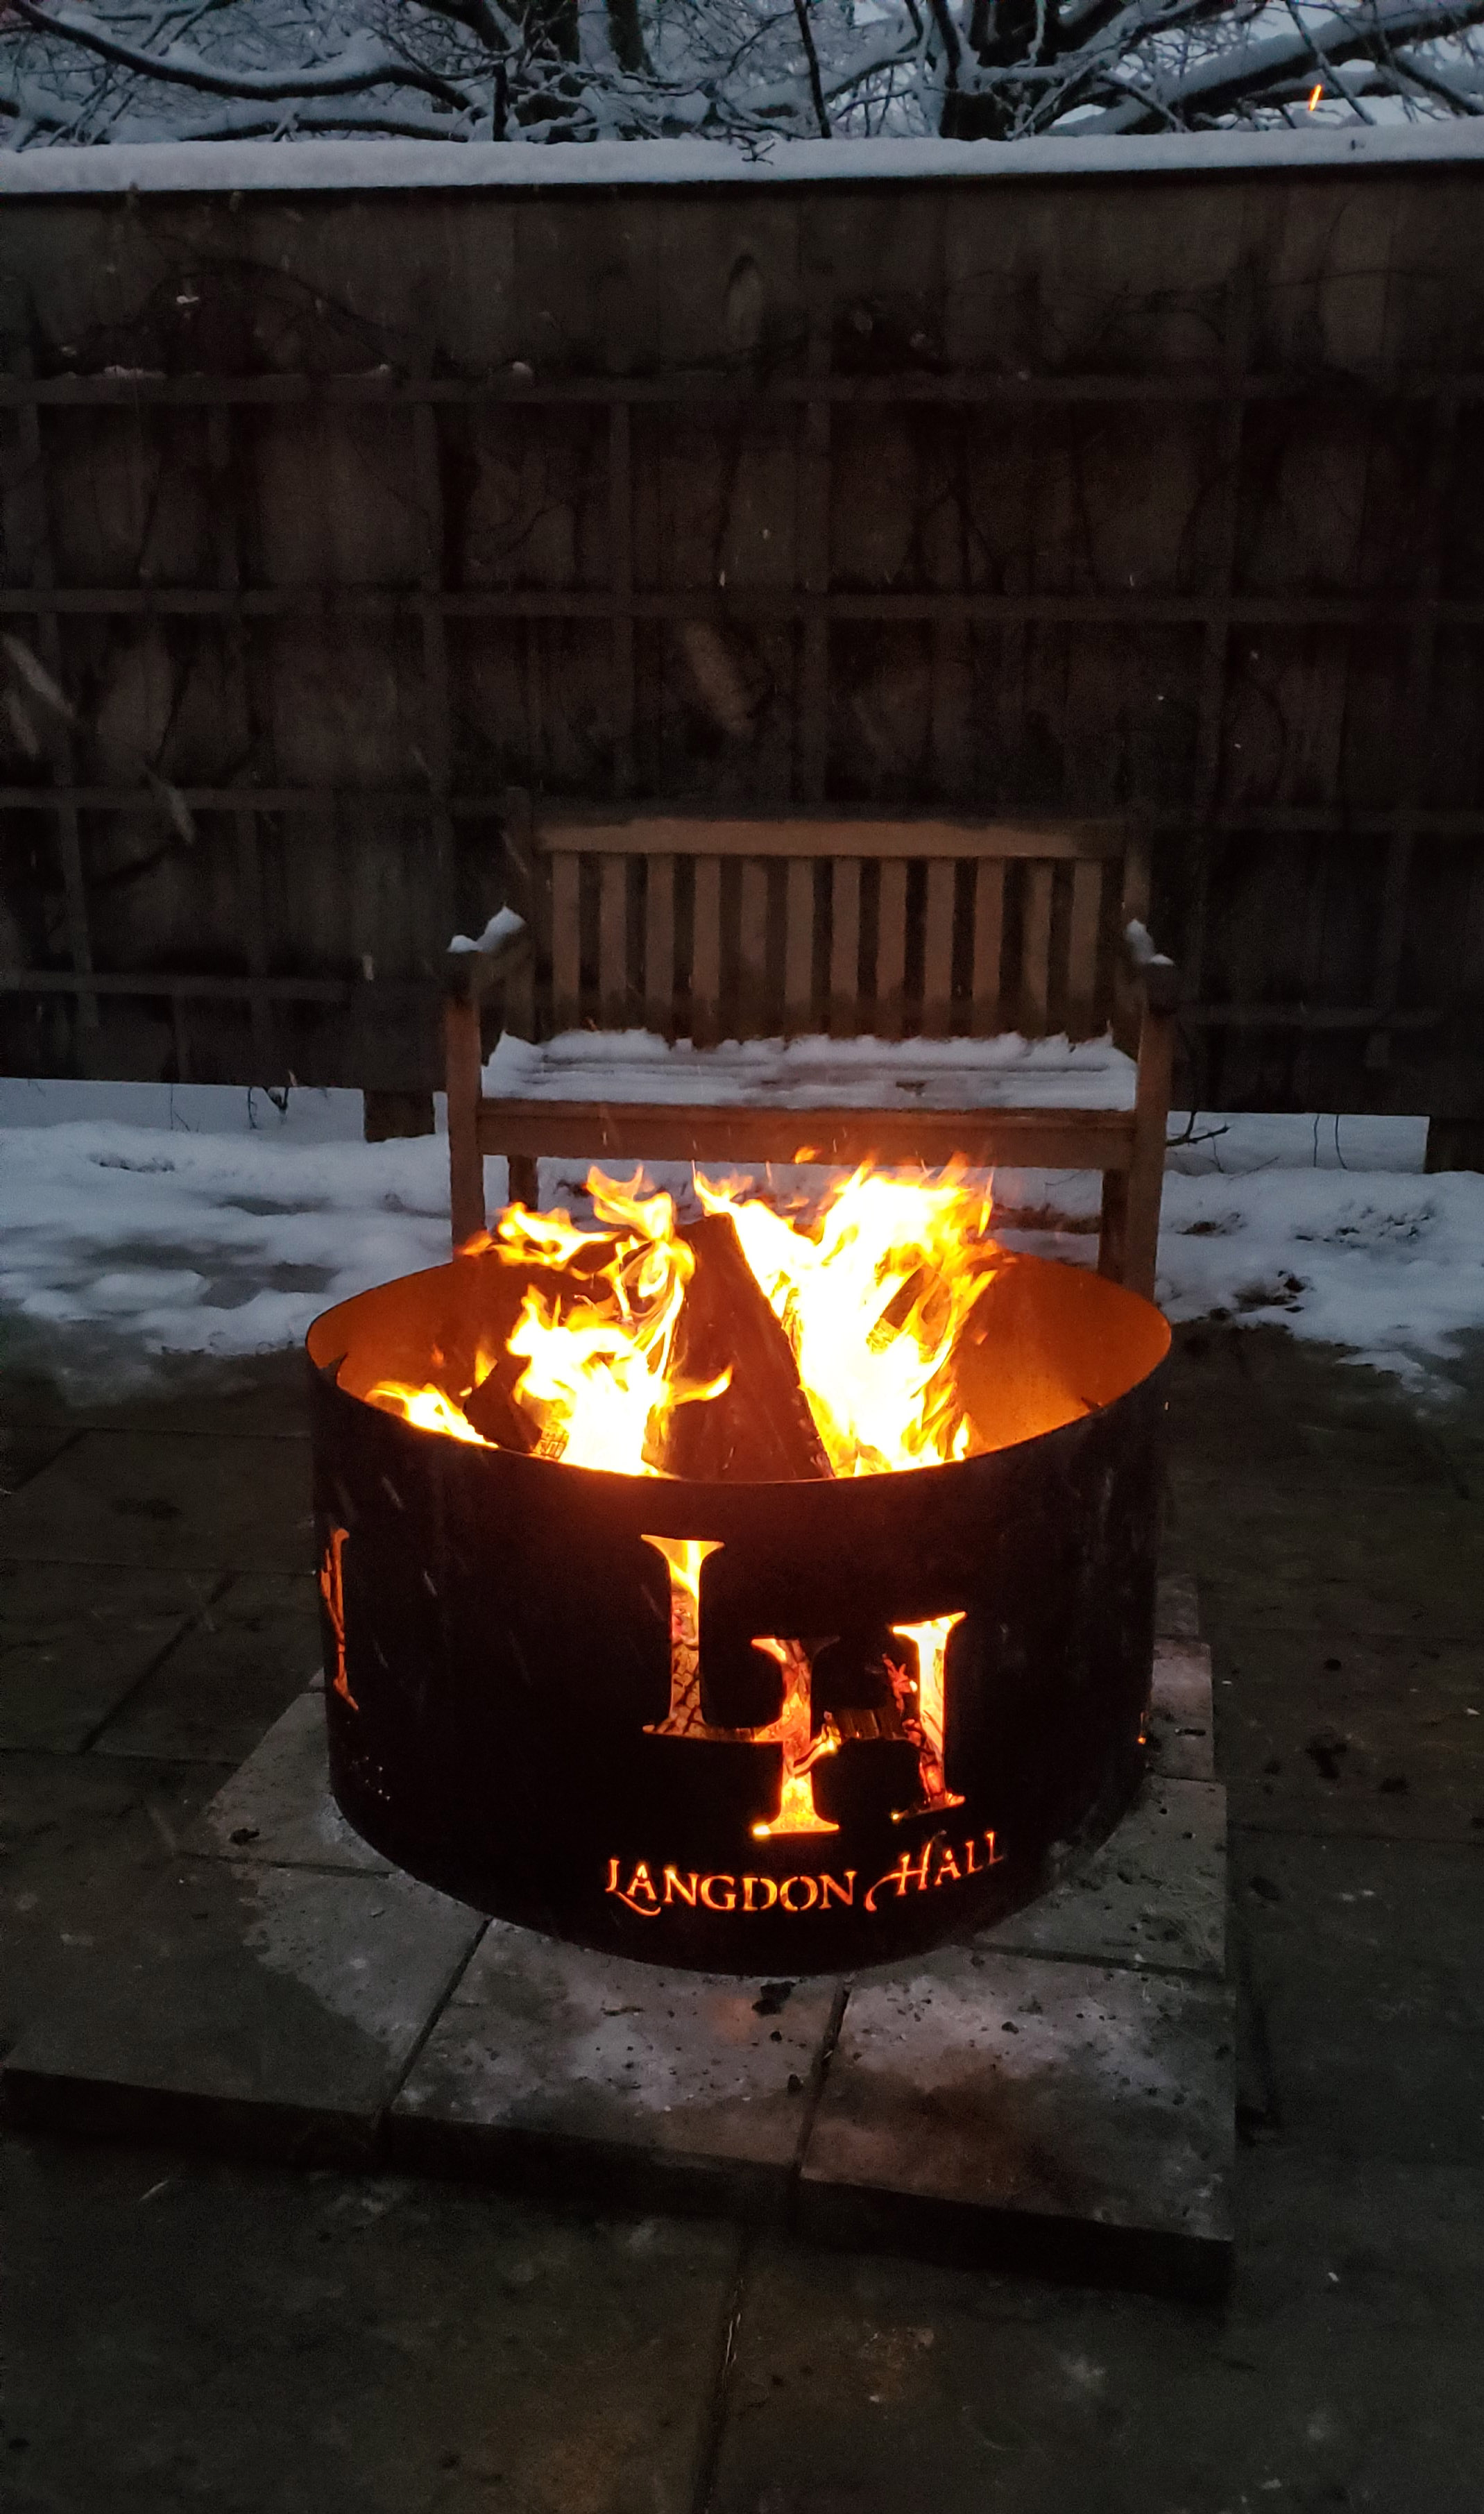 Fire Pits Are This Winter S Hottest, Are Propane Fire Pits Legal In Ontario Canada